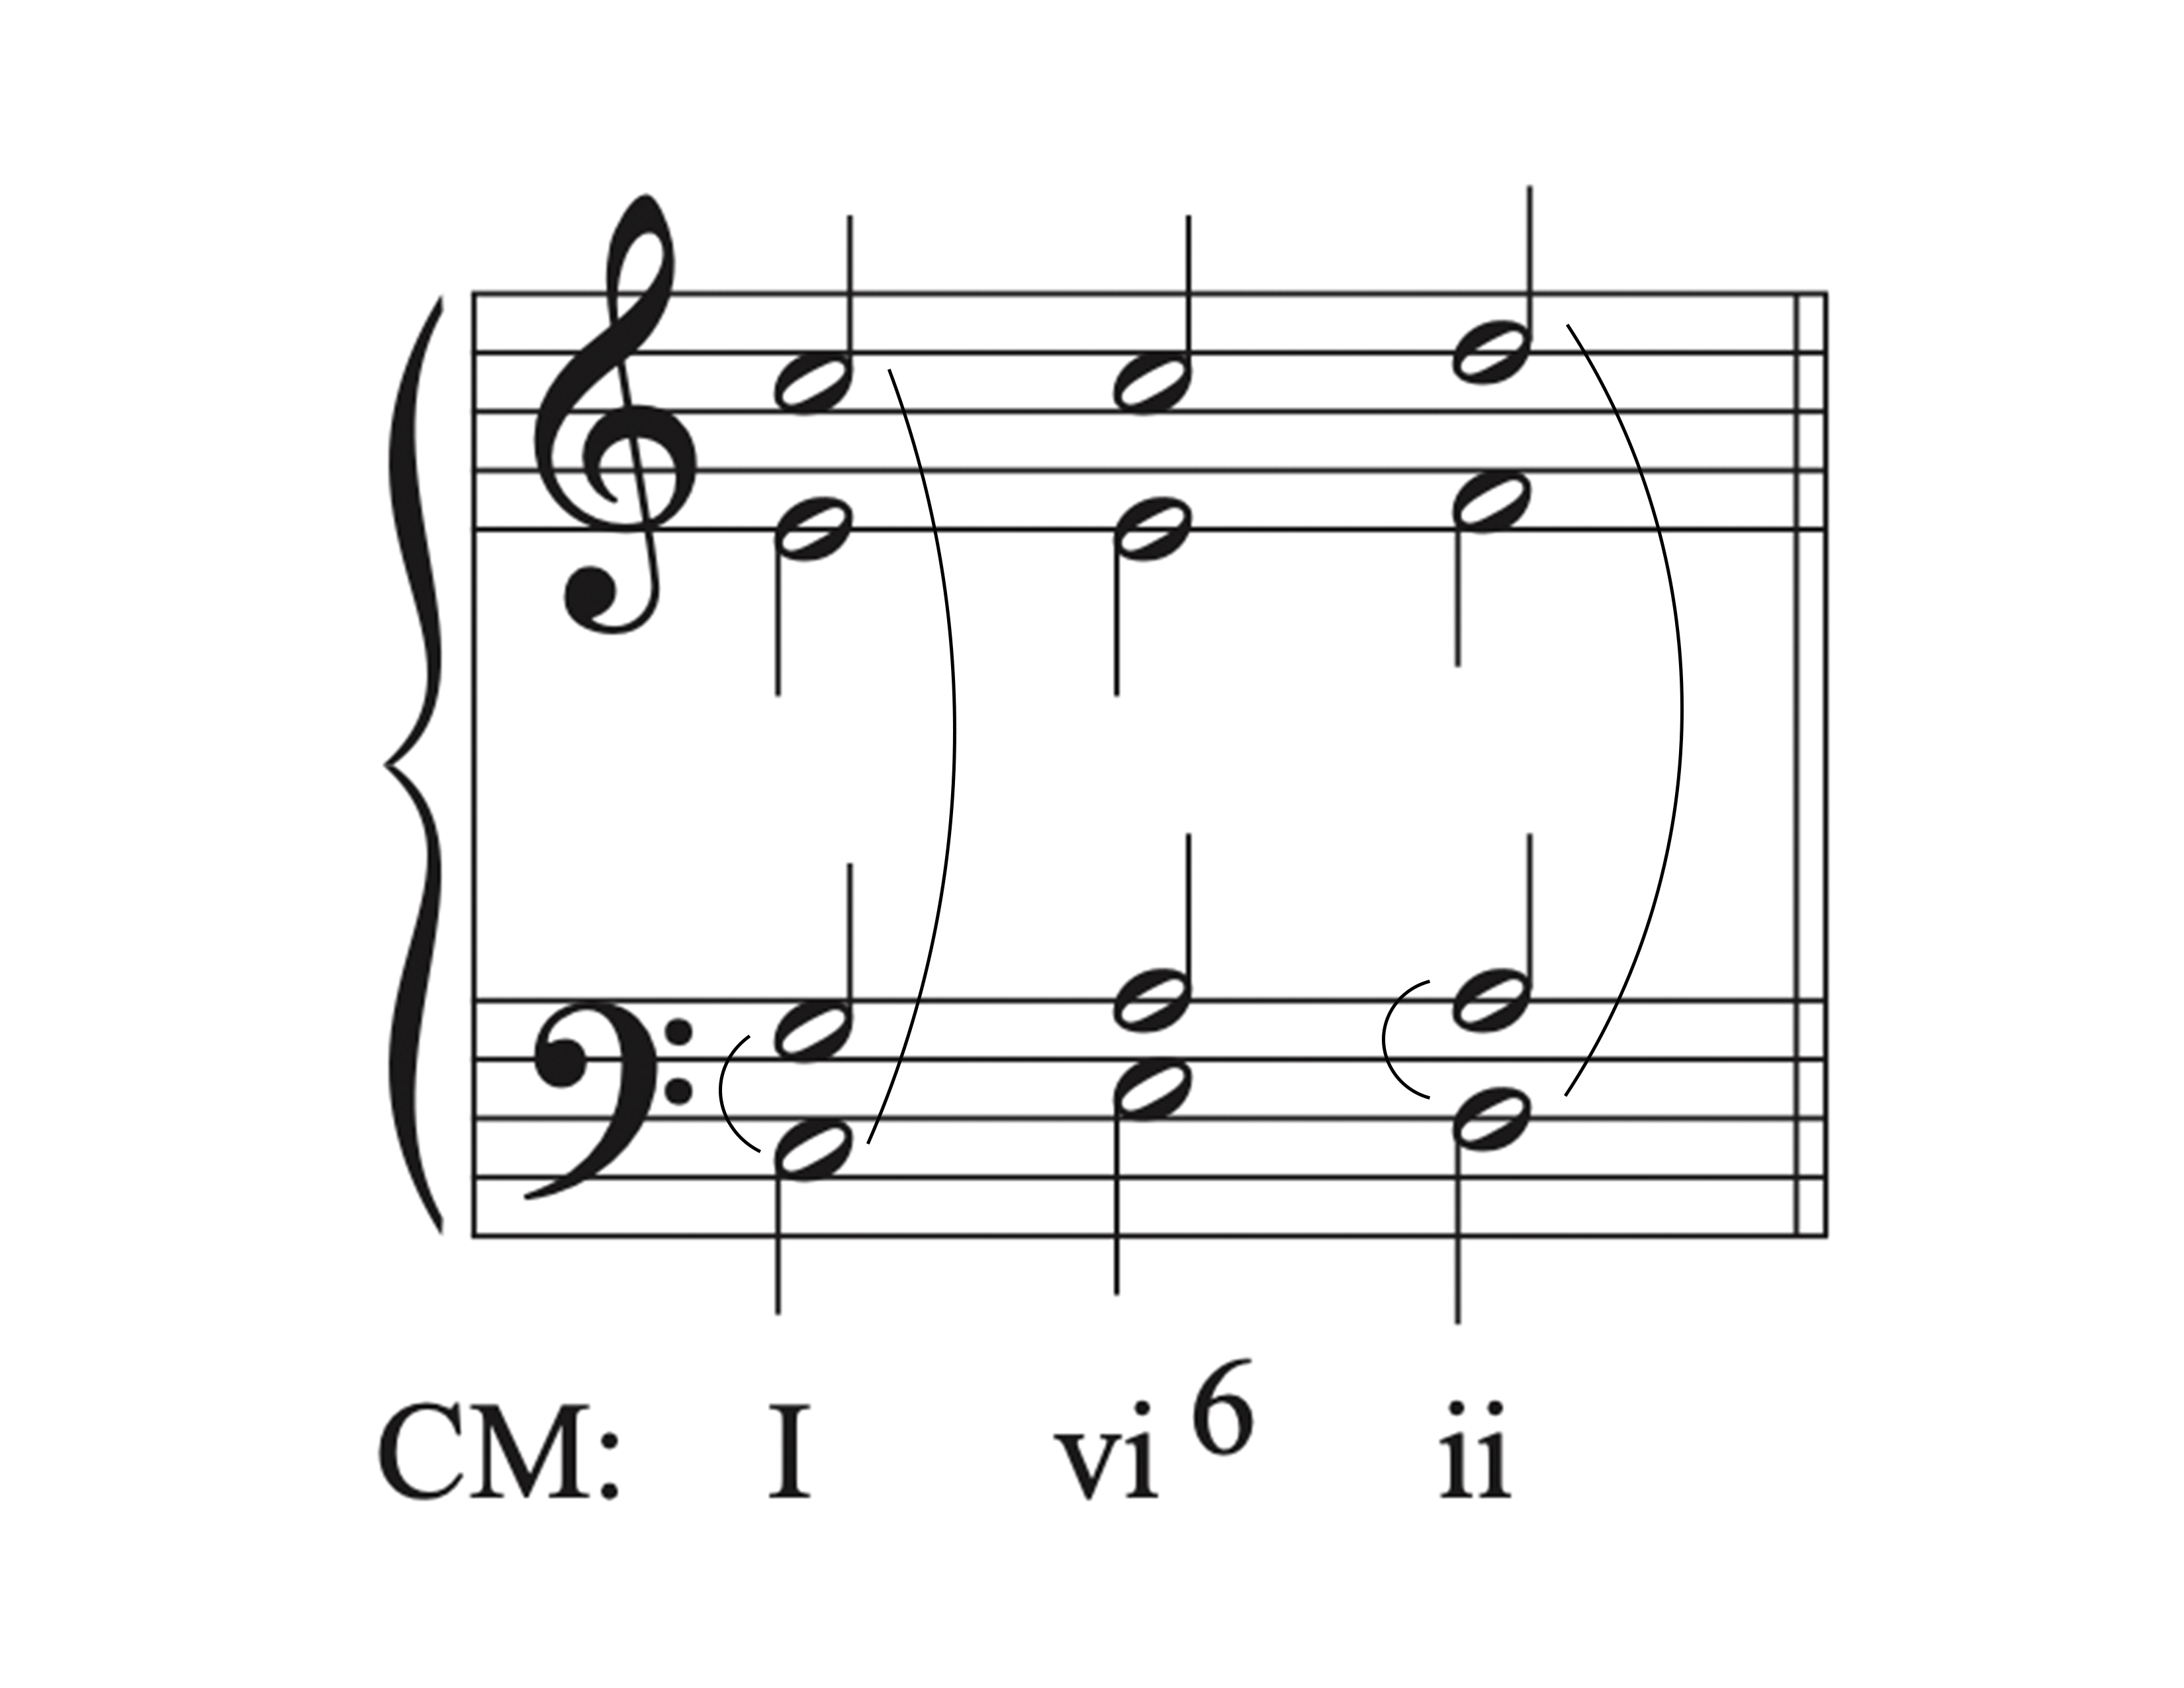 A musical example using vi6 to move between I and ii chords.